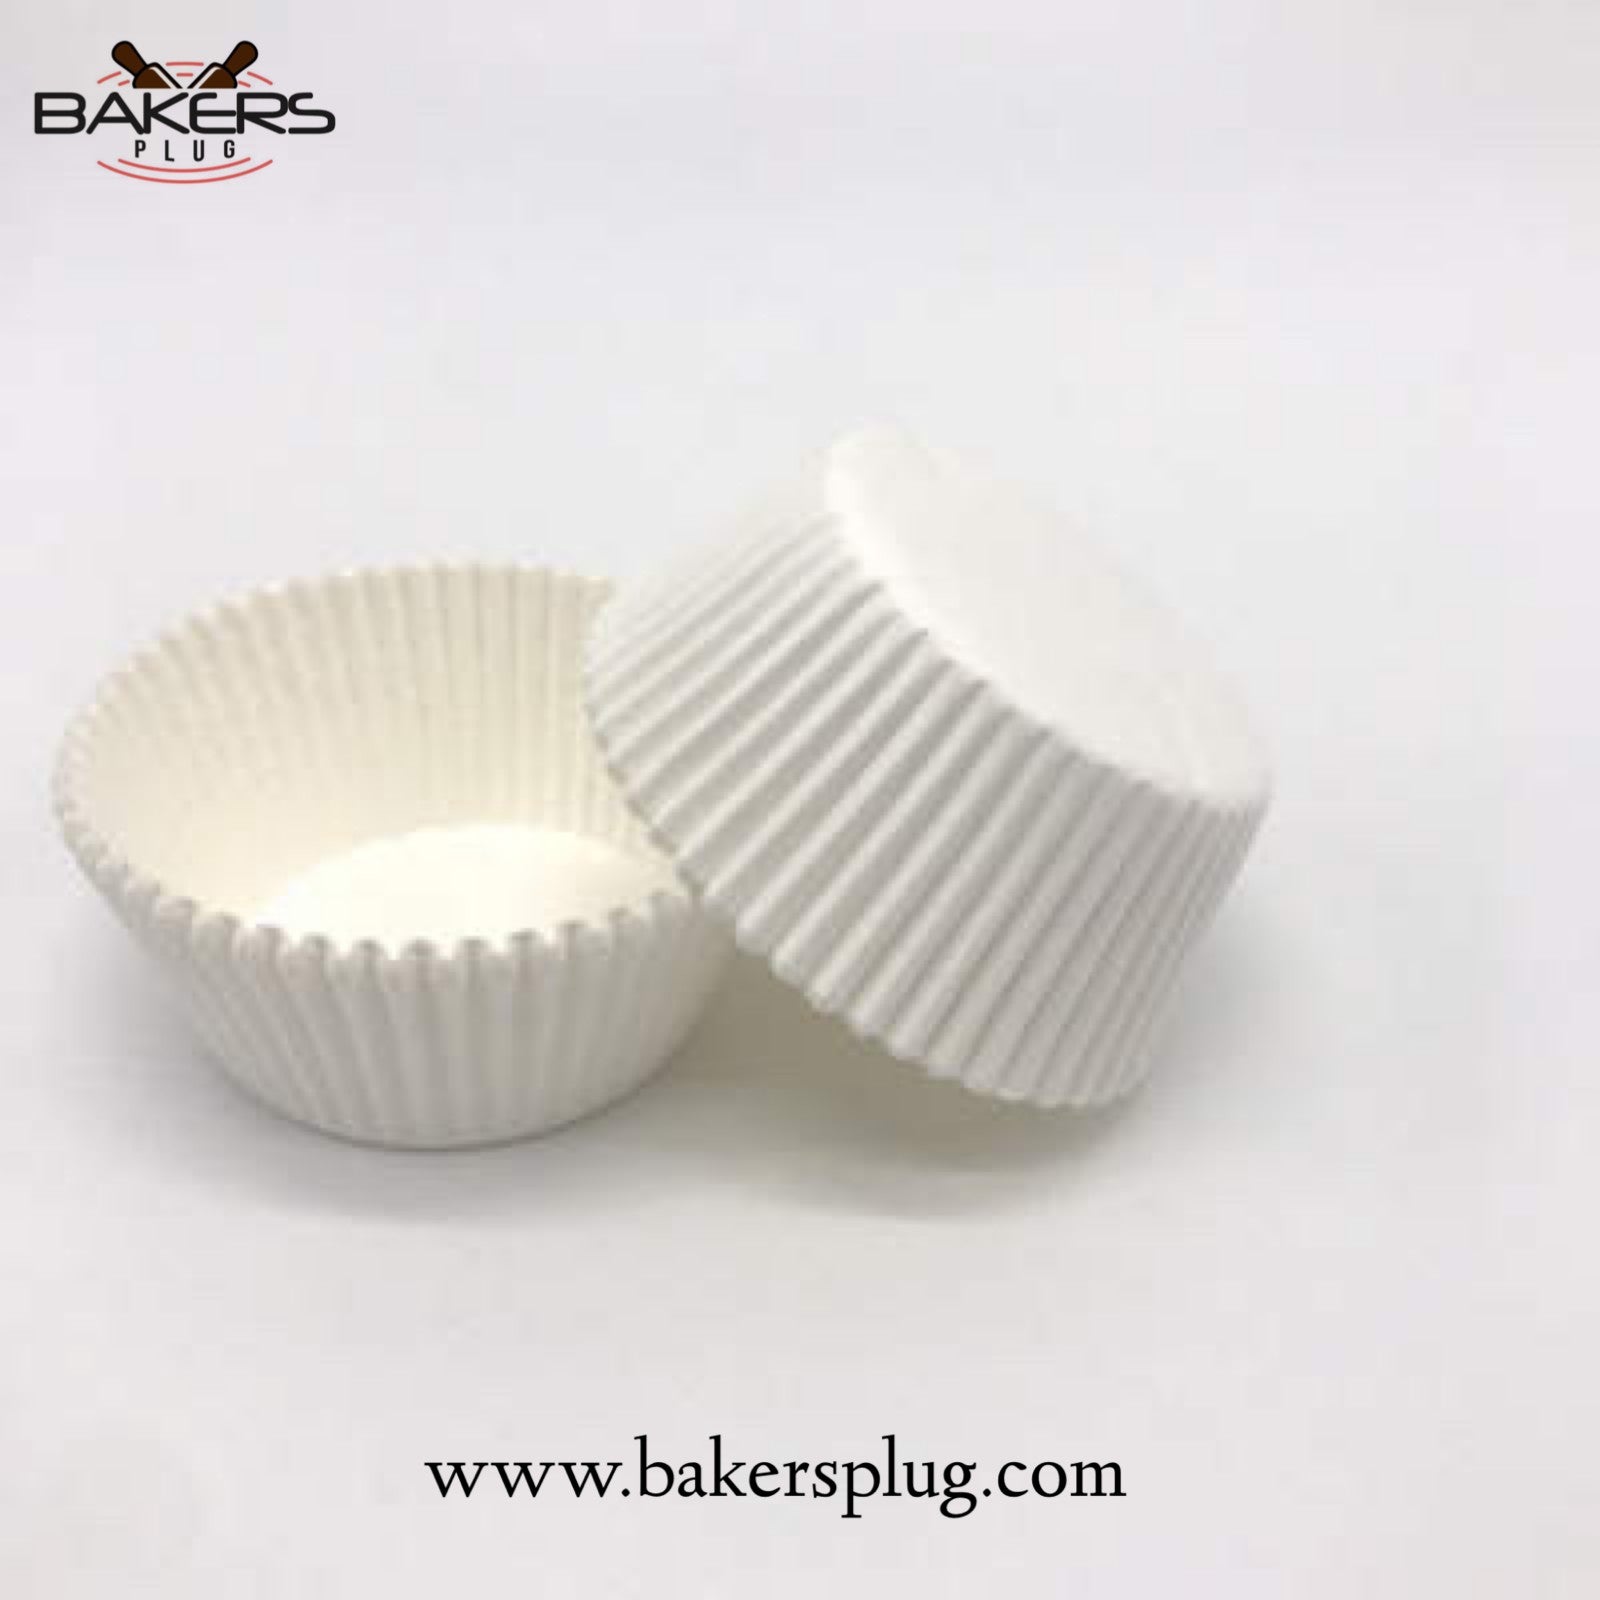 Cupcake liners The Bakers Plug